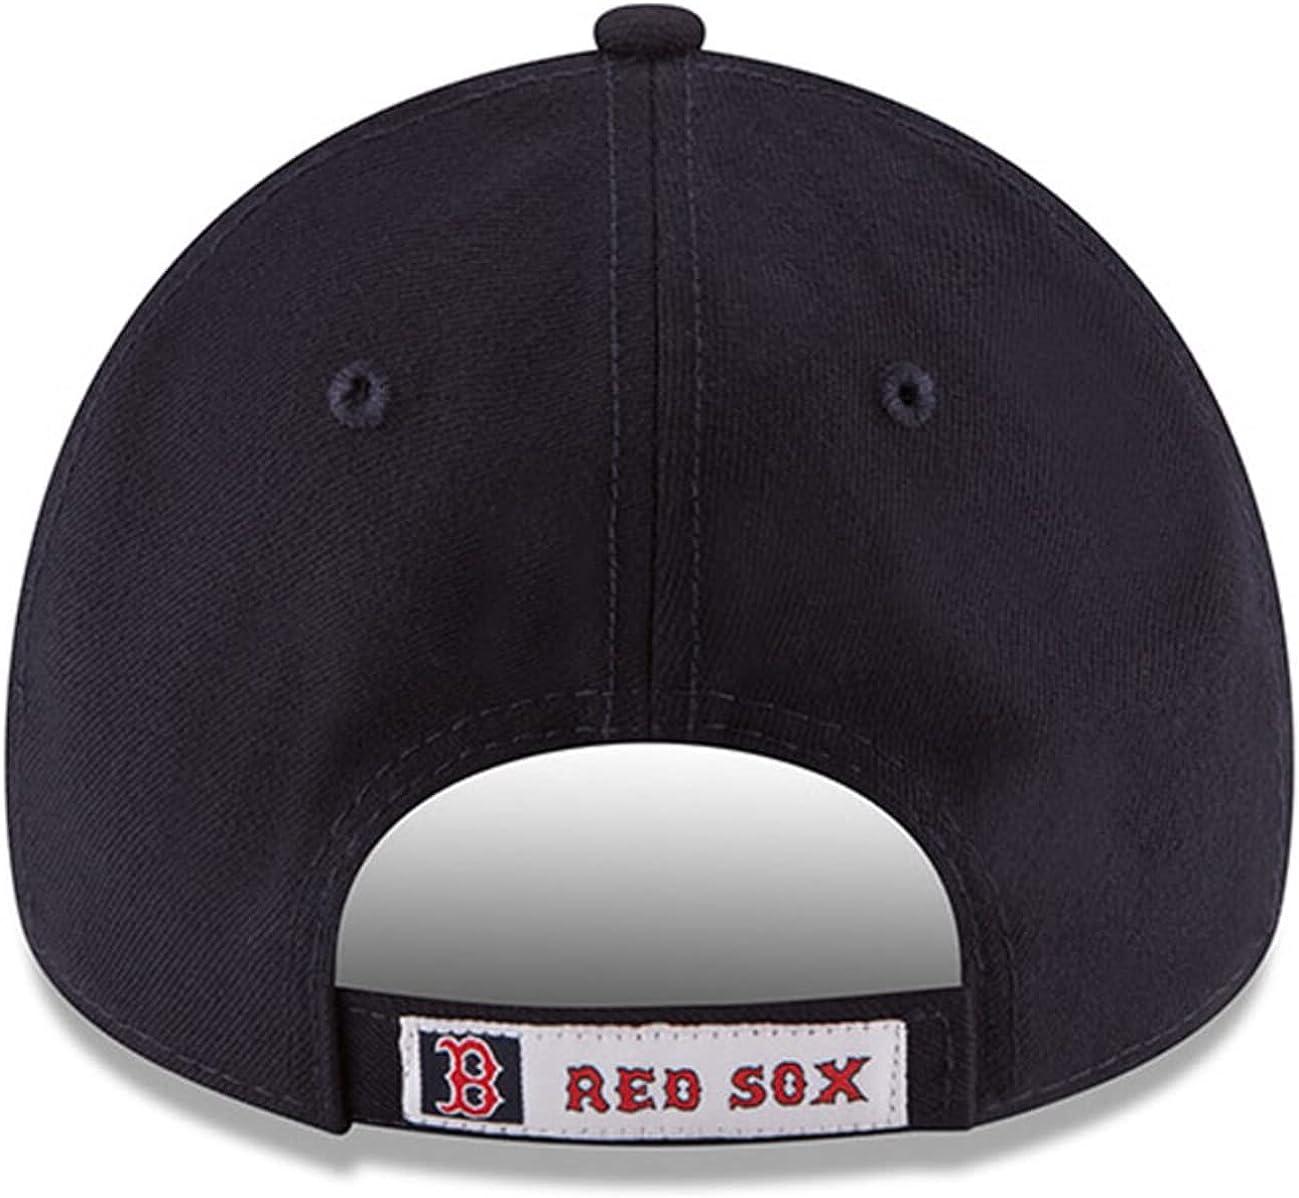 Boston Red Sox Officially Licensed MLB Adjustable  